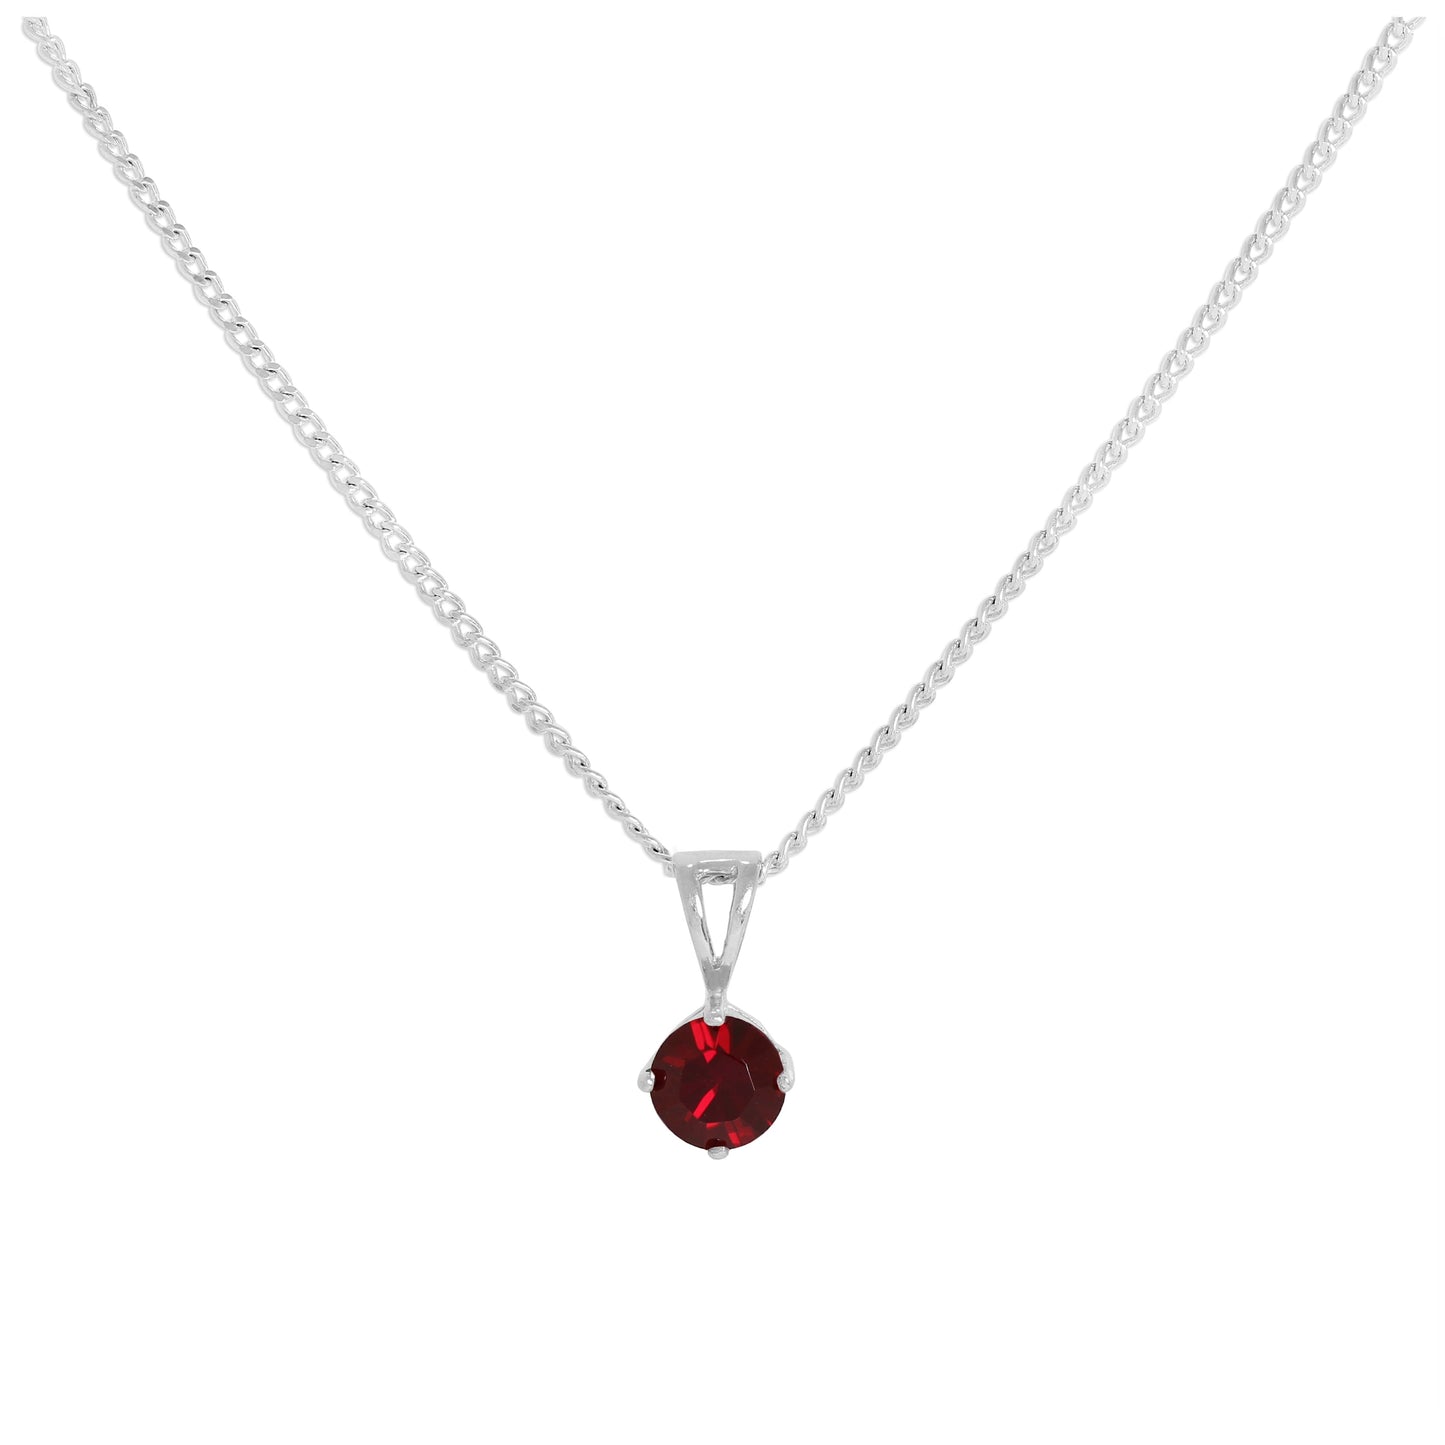 Sterling Silver & Garnet CZ January Birthstone Pendant Necklace 16 - 24 Inches